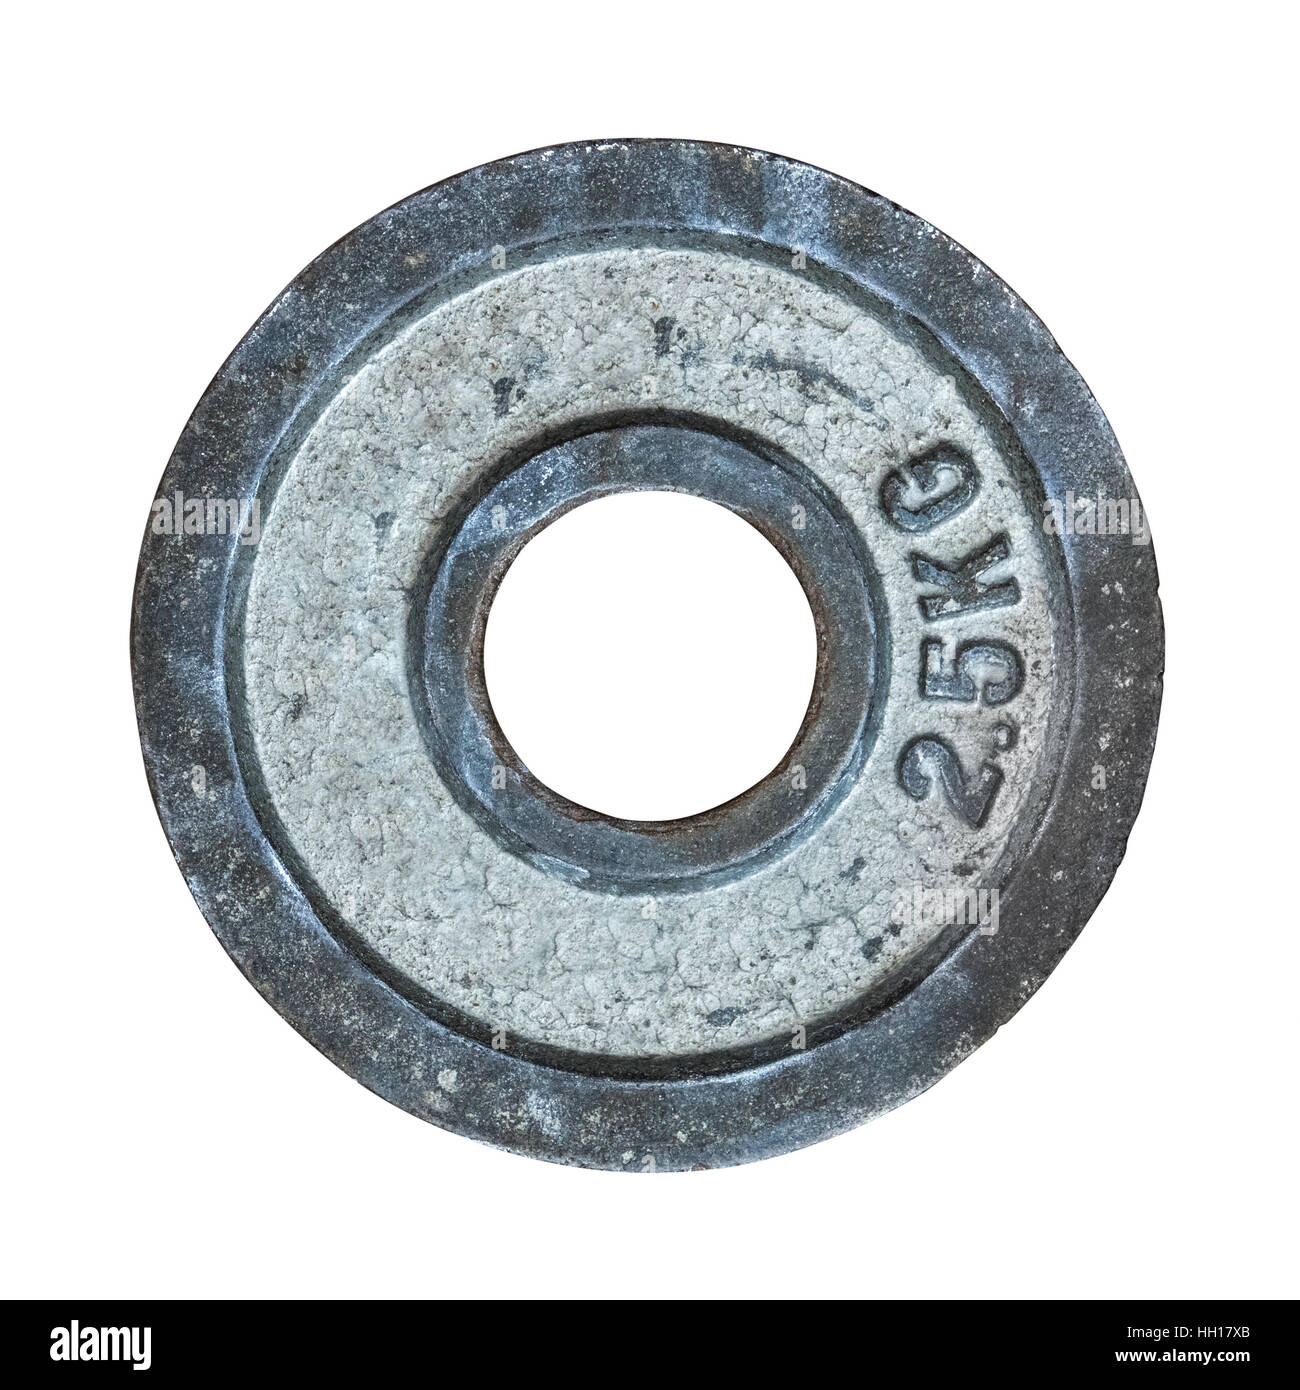 Isolated Gym Barbell Plate Stock Photo